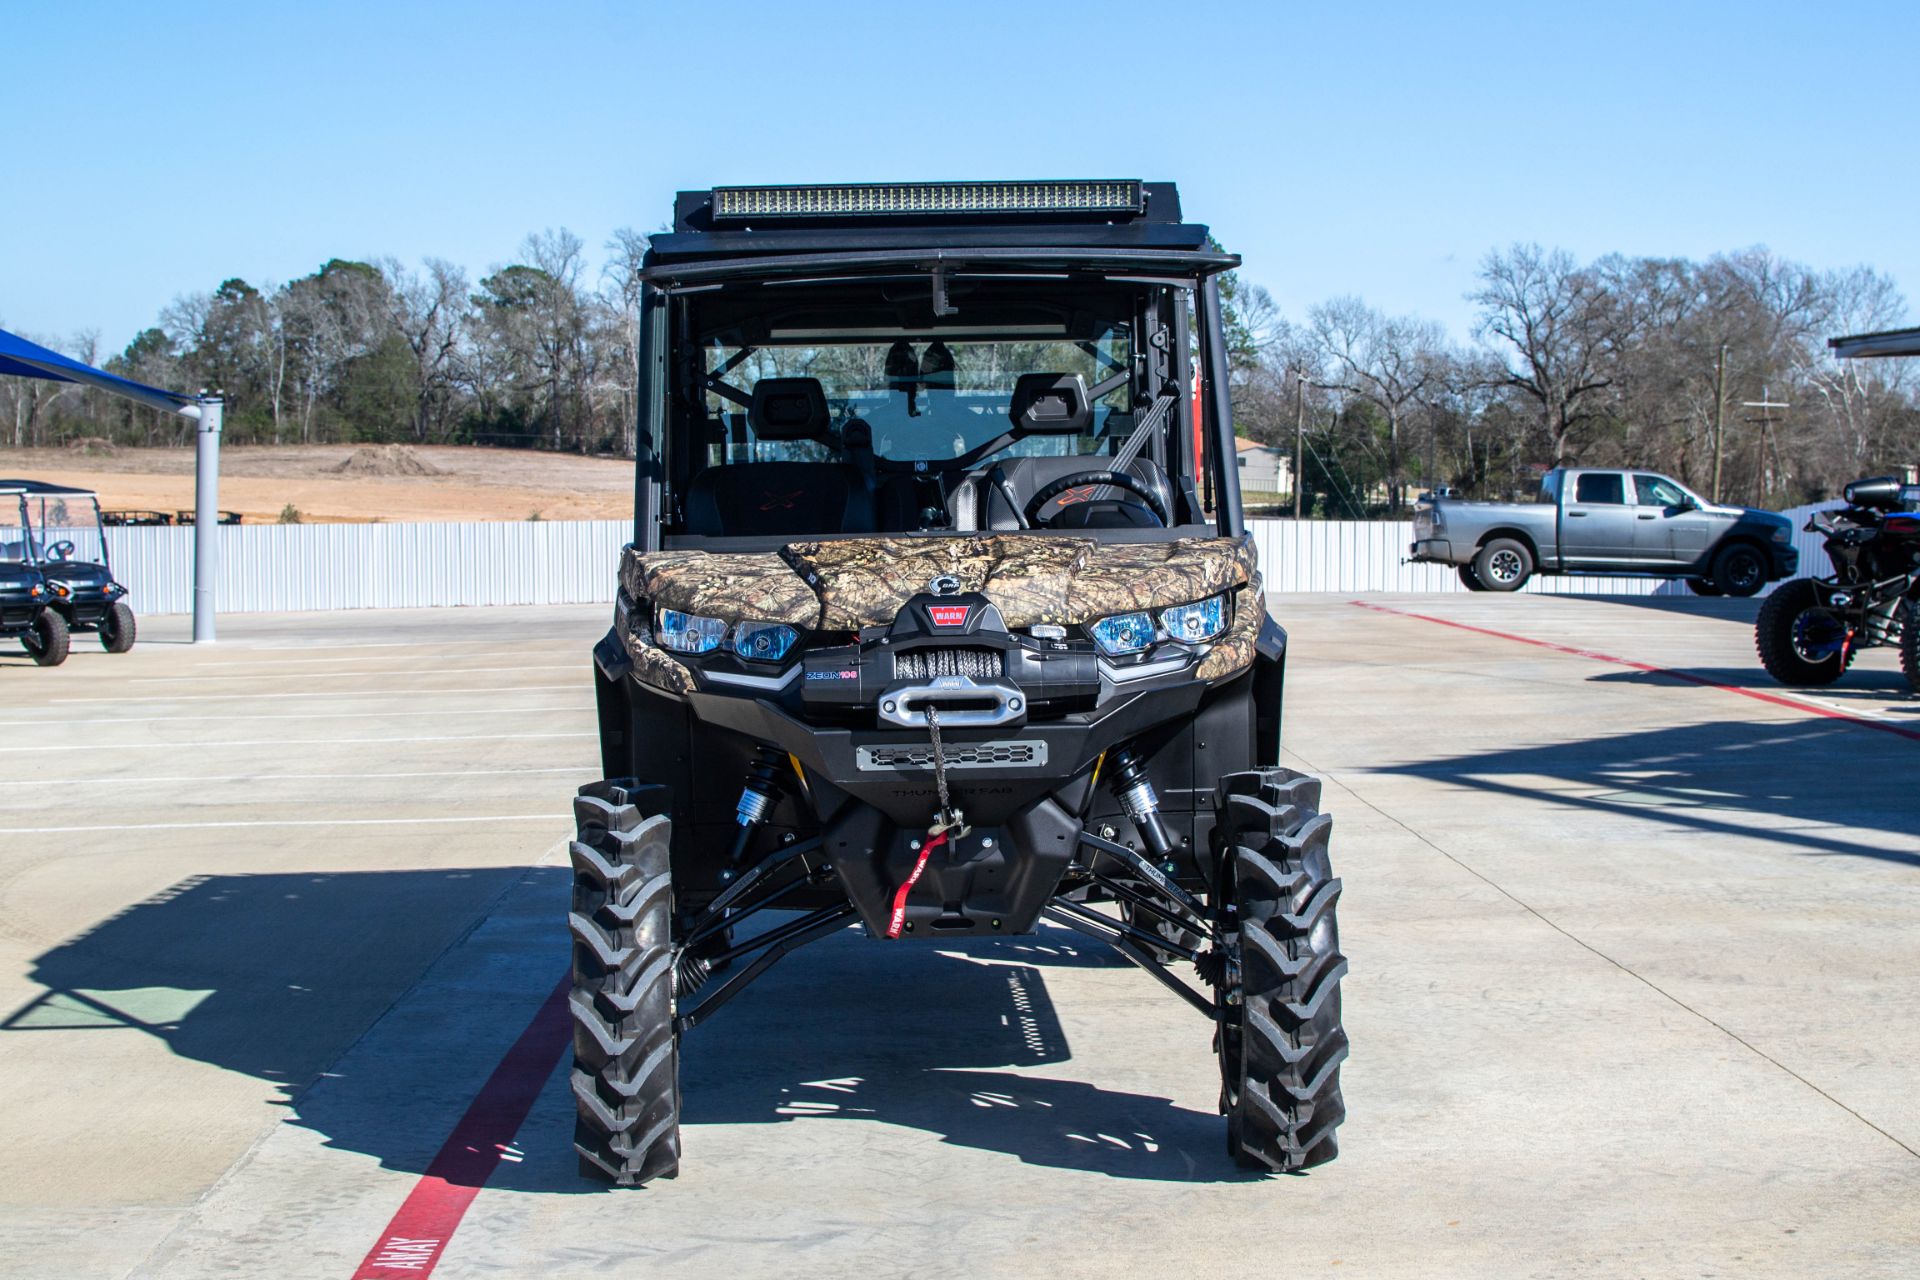 2022 Can-Am Defender MAX X MR HD10 in Huntsville, Texas - Photo 3